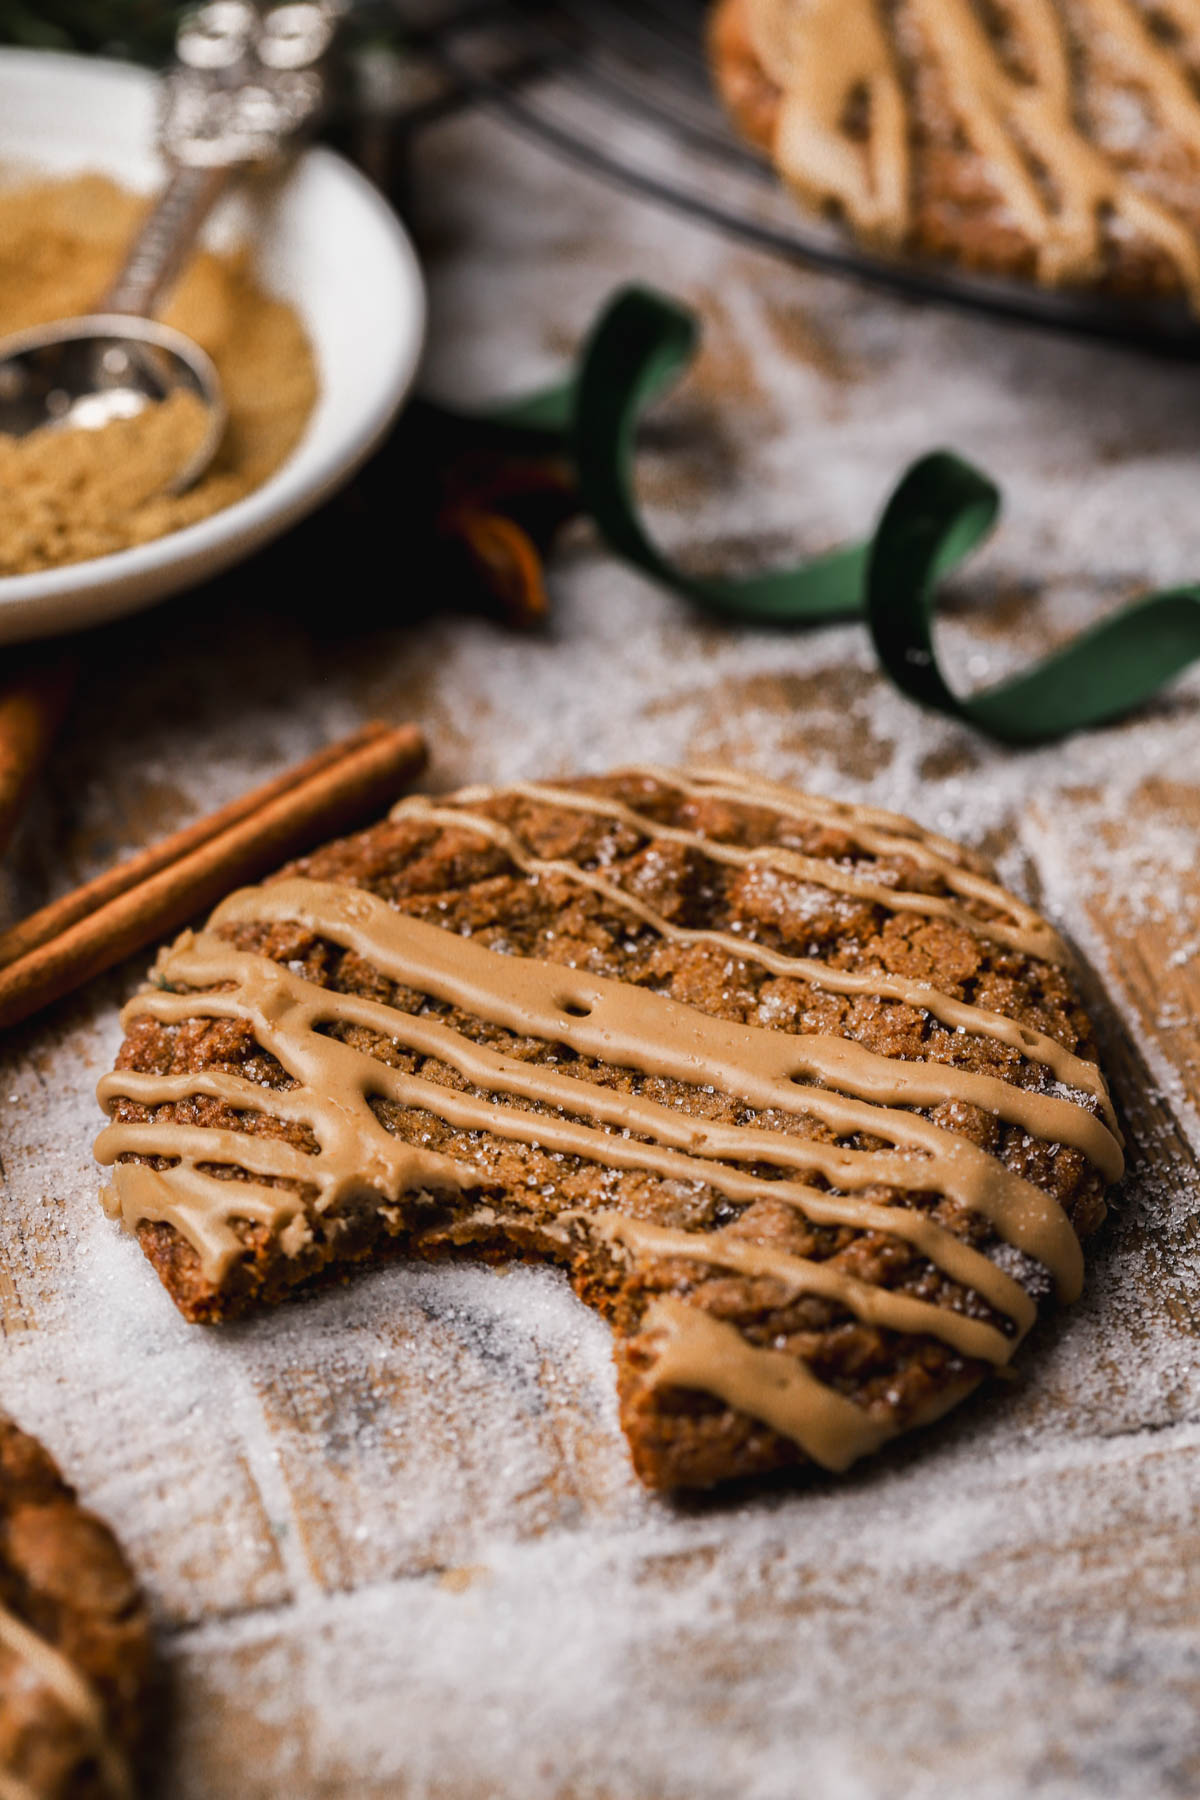 Gingerbread cookies flavored with molasses, espresso powder and drizzled with coffee glaze. 